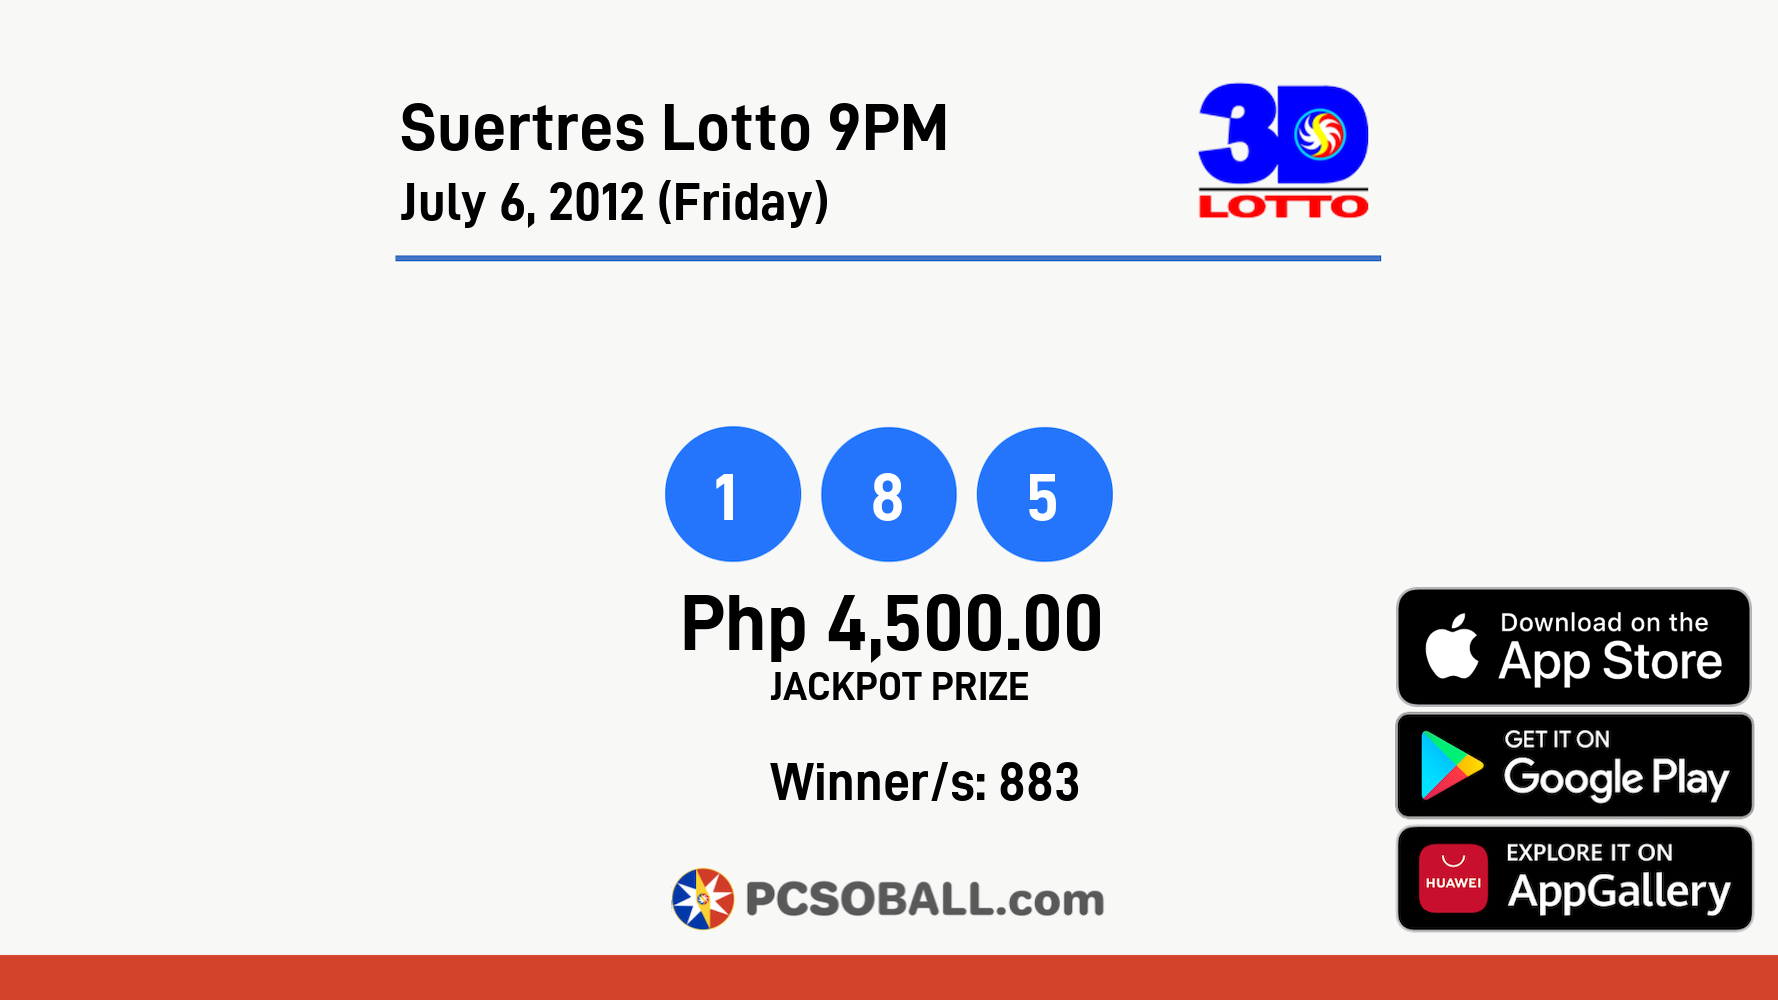 Suertres Lotto 9PM July 6, 2012 (Friday) Result